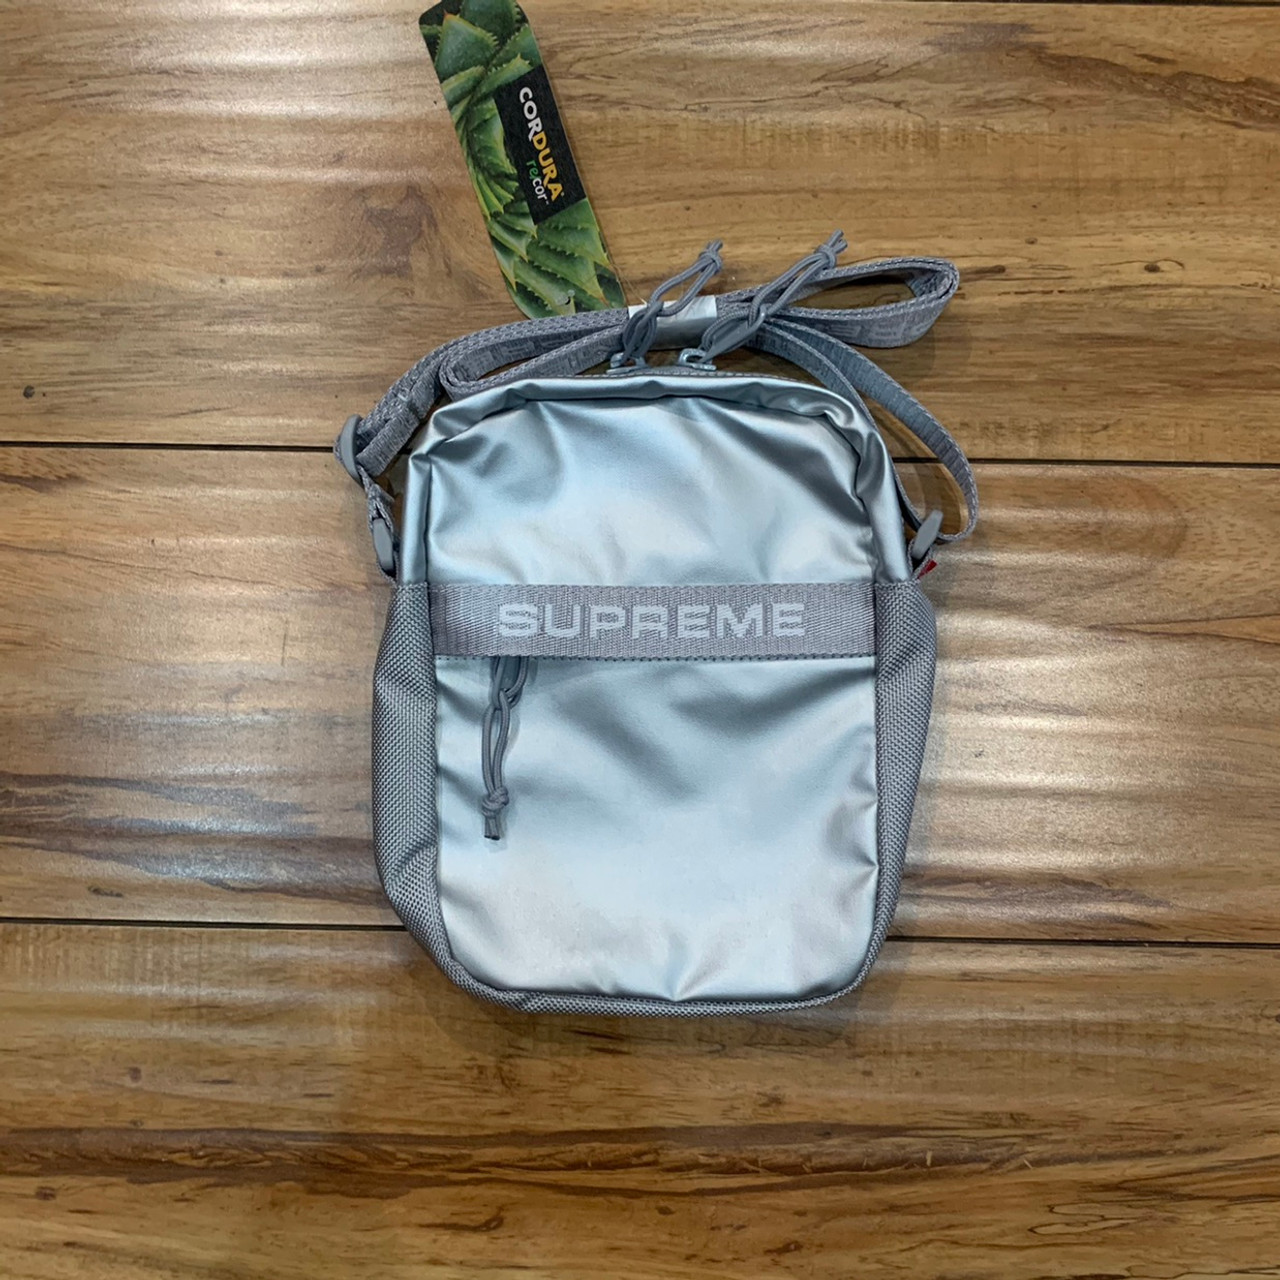 The BEST Supreme shoulder bag  review (4 Years Later) 